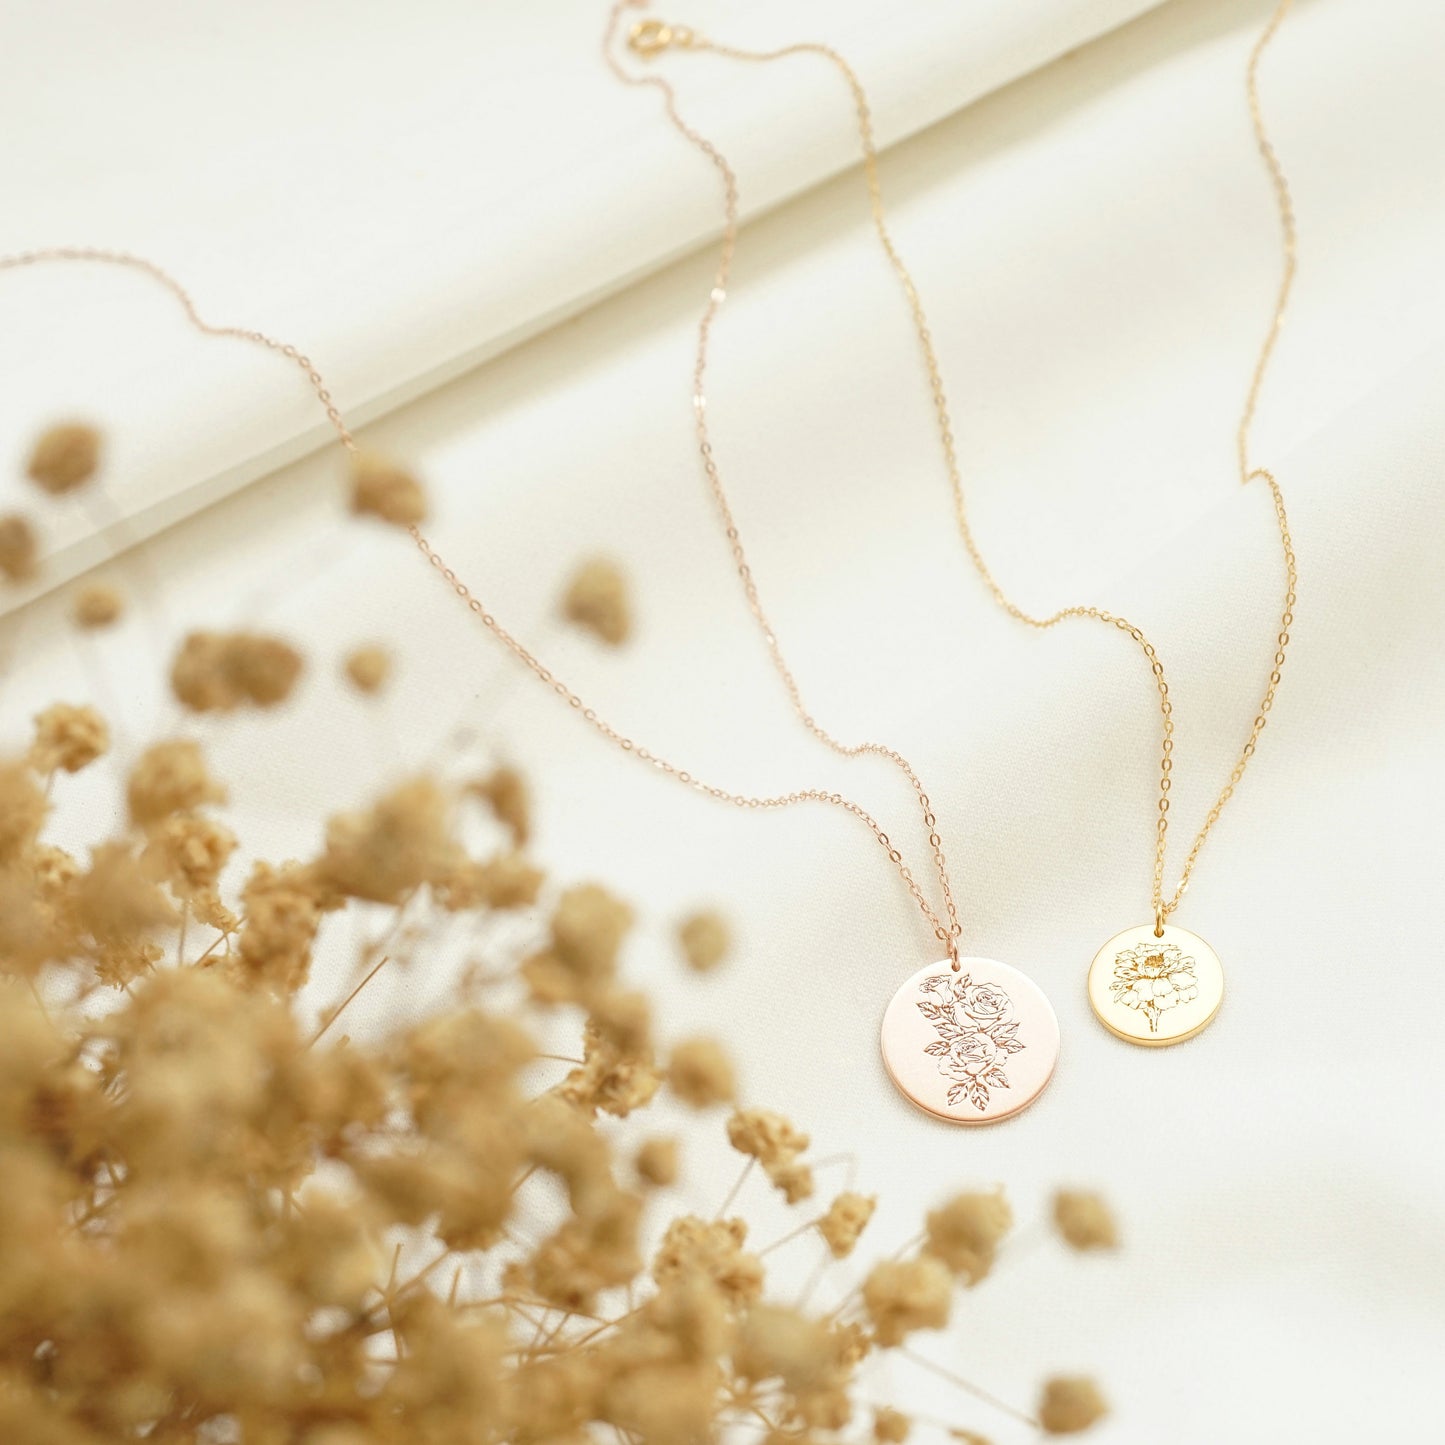 Personalized Mother's Day Gift | Birth Flower Necklace | Mother Daughter Necklace | Gold Plated Necklace | Delicate Custom Necklace for Mom